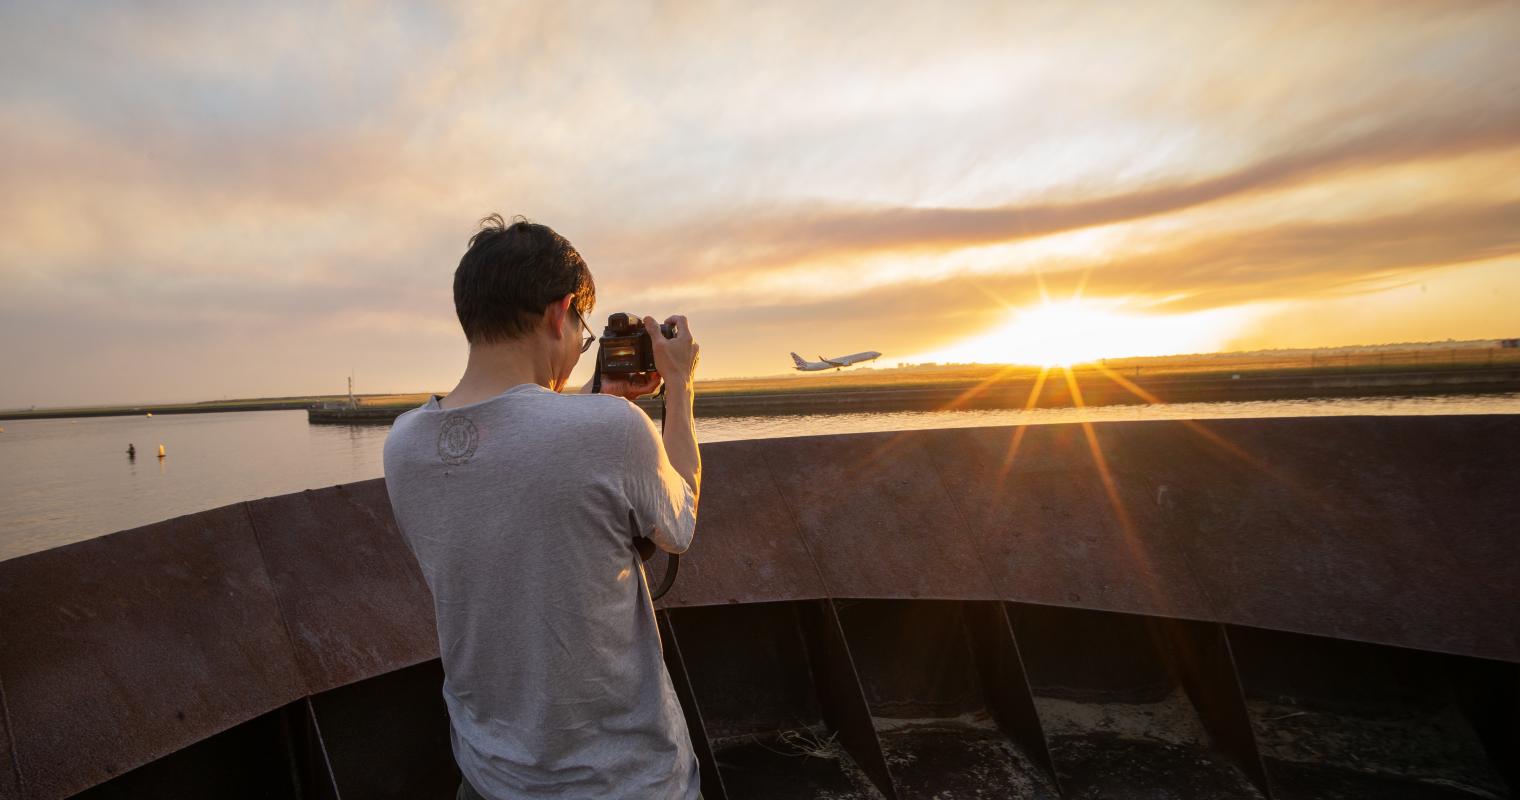 image of a person taking a photo of a plane taking off